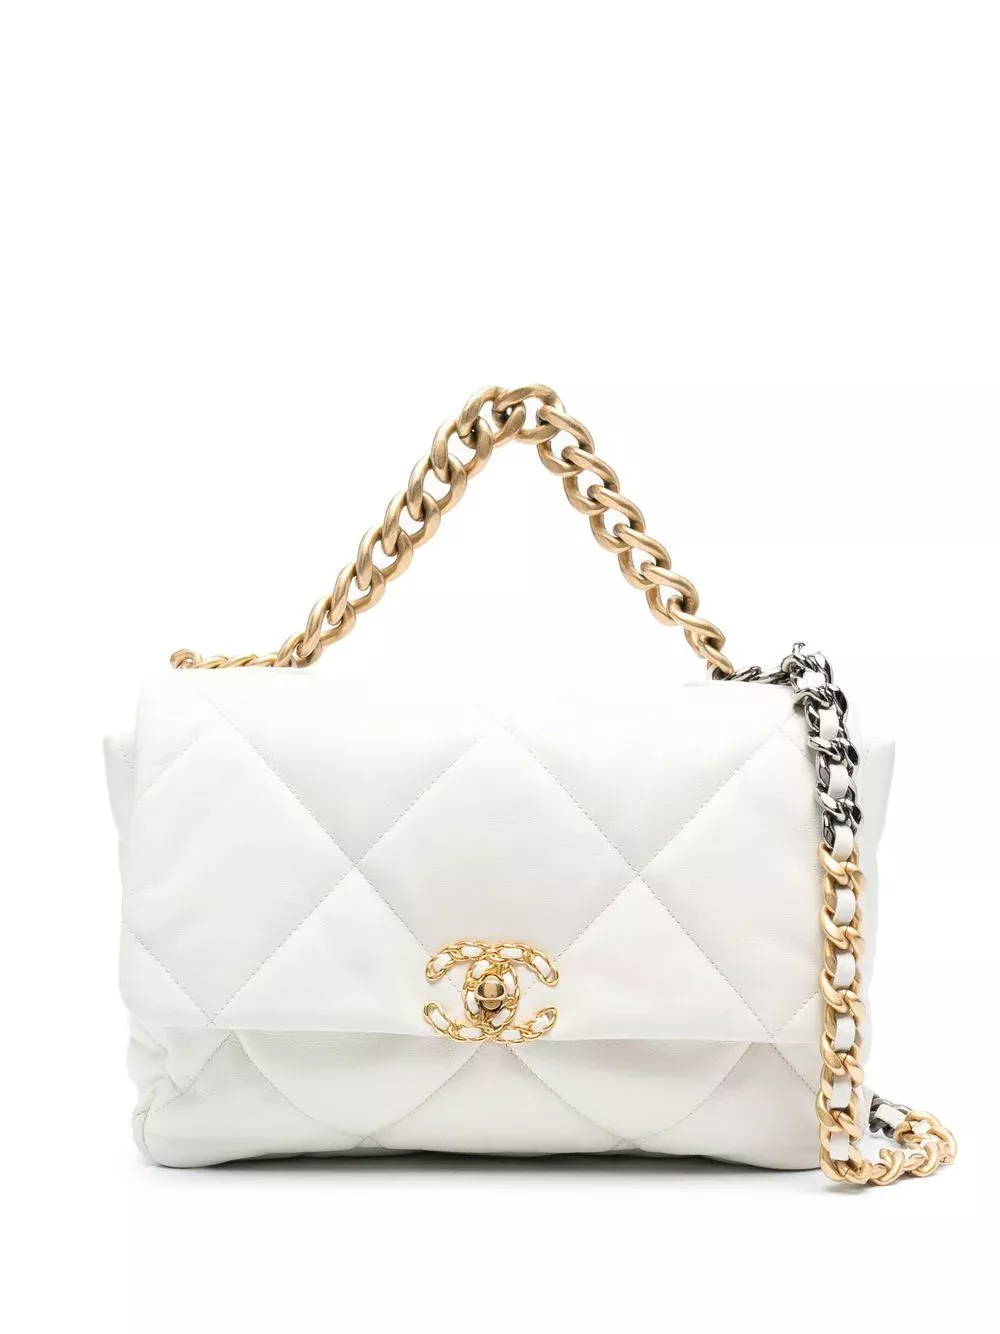 CHANEL Lambskin Quilted Large Chanel 19 Flap Beige 682754